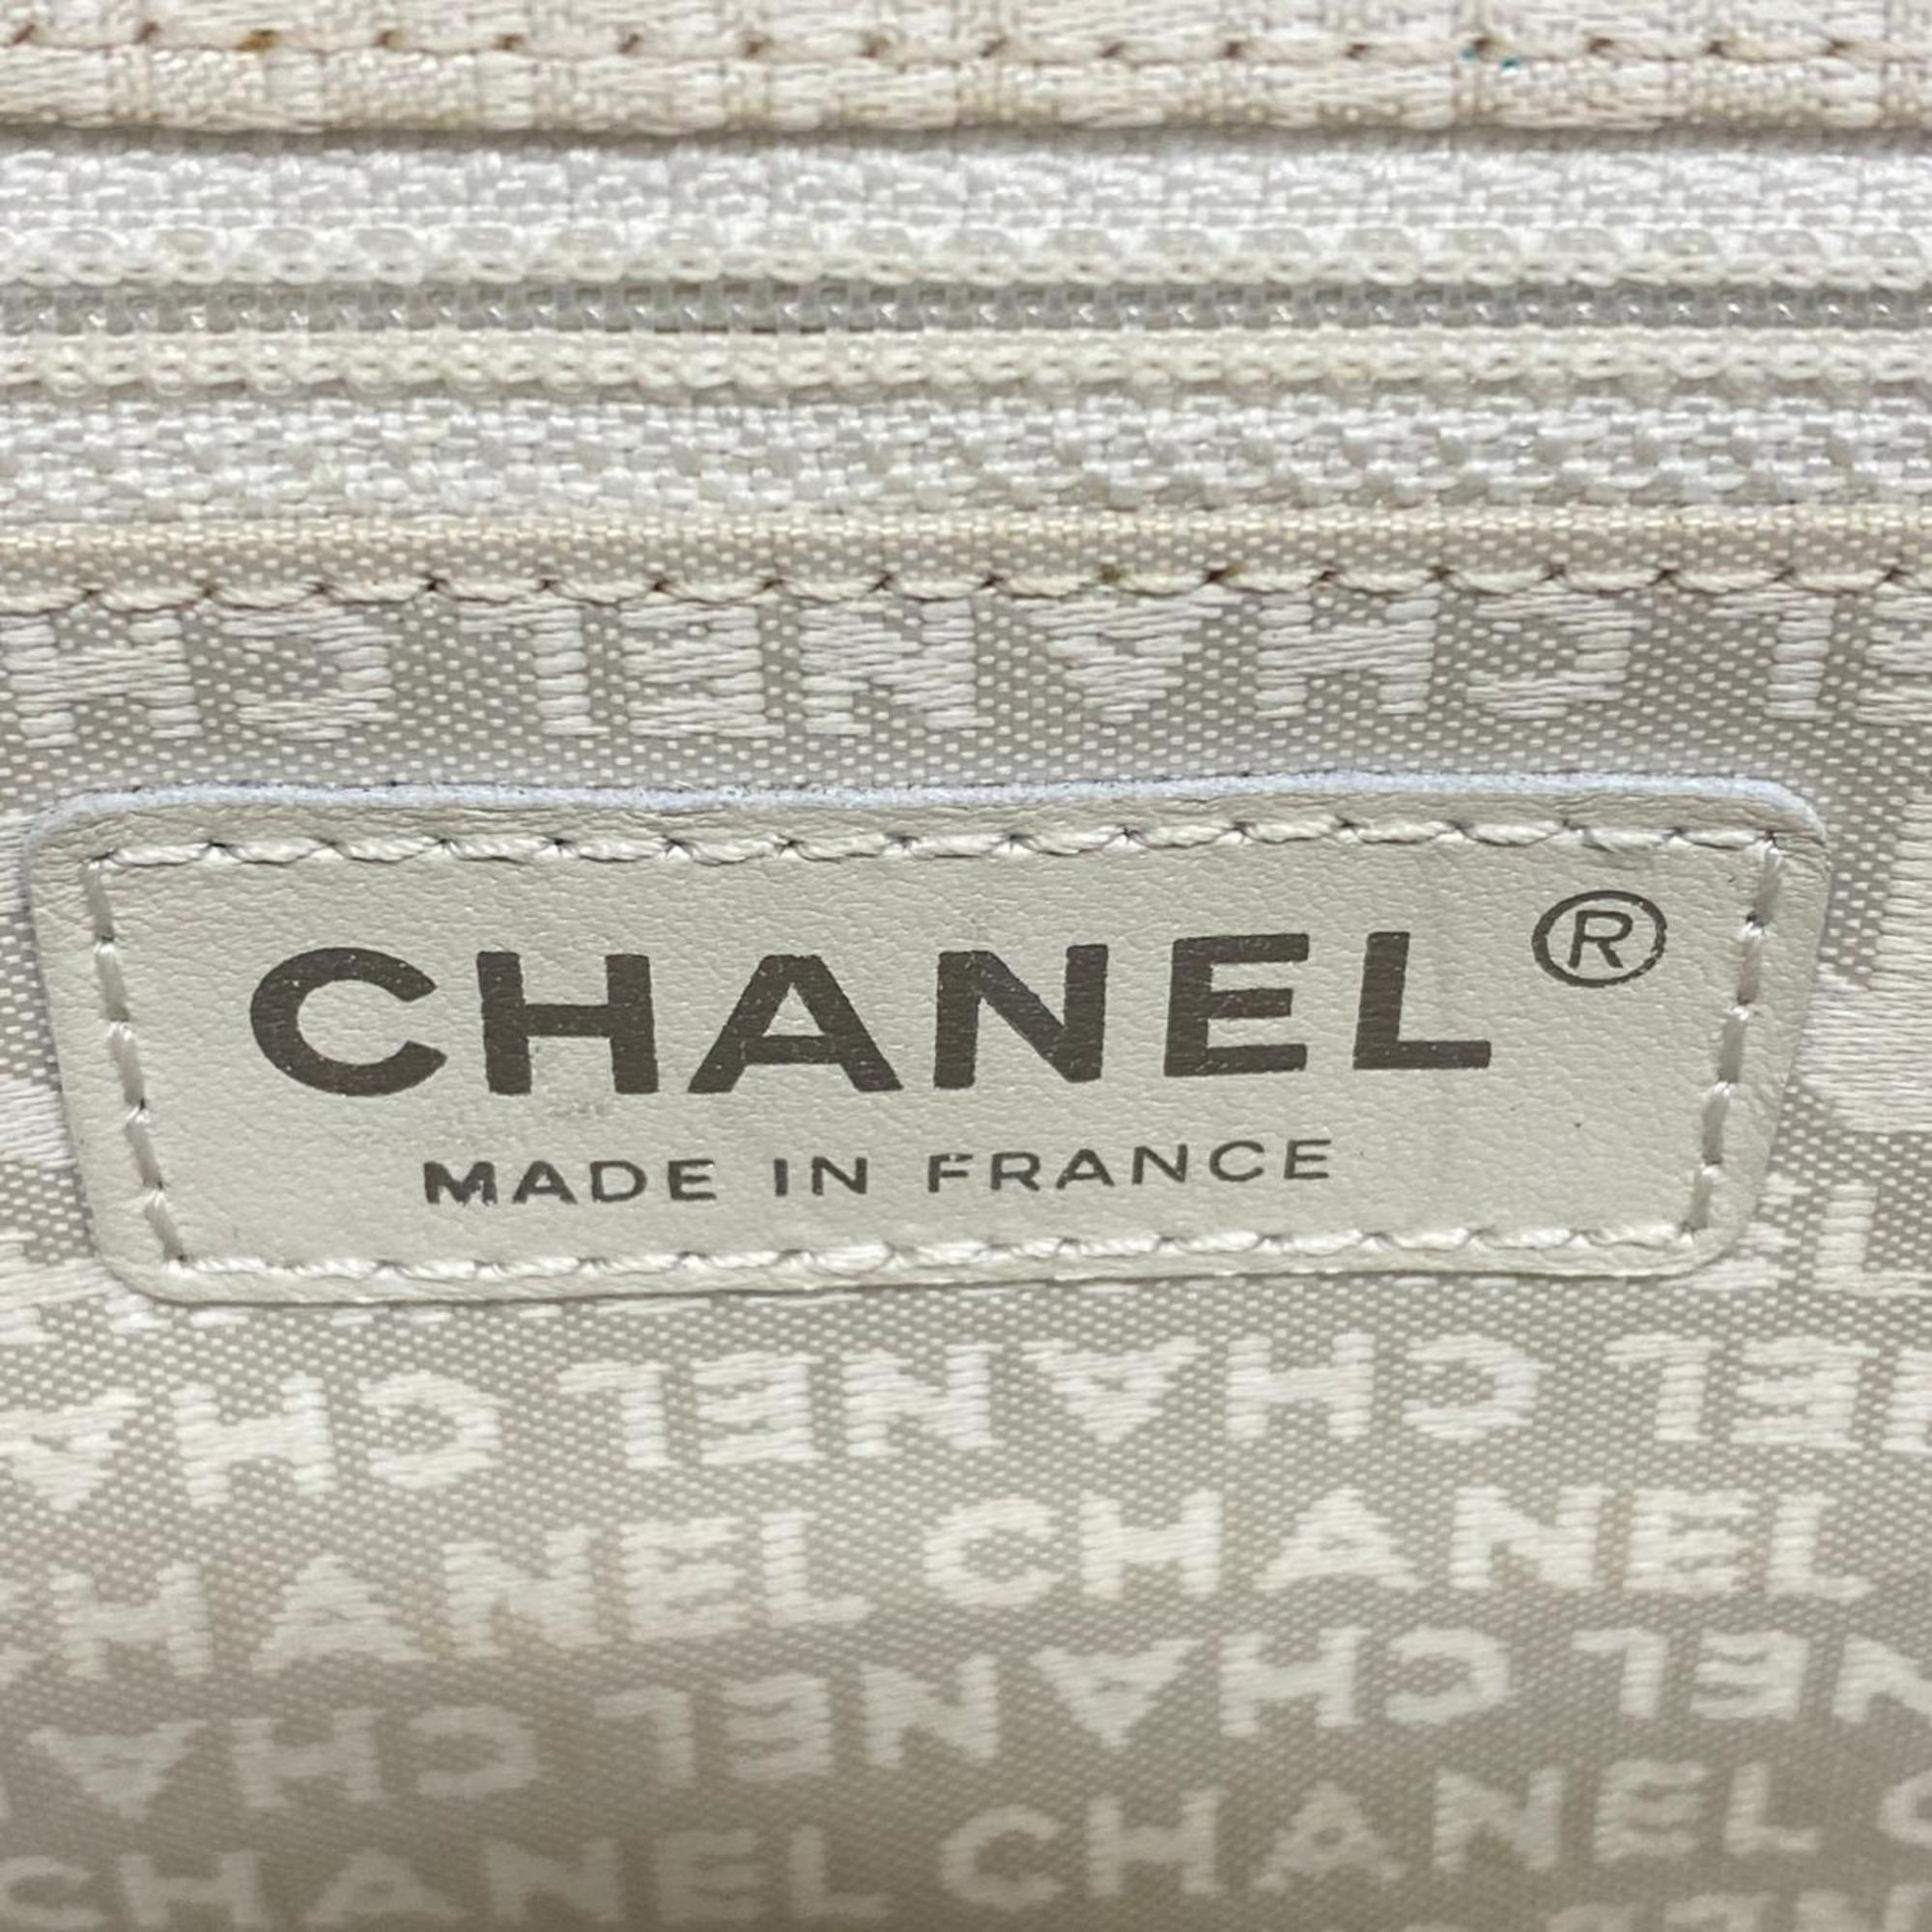 Chanel Shoulder Bag Chocolate Bar Double Flap Chain Leather Brown Women's